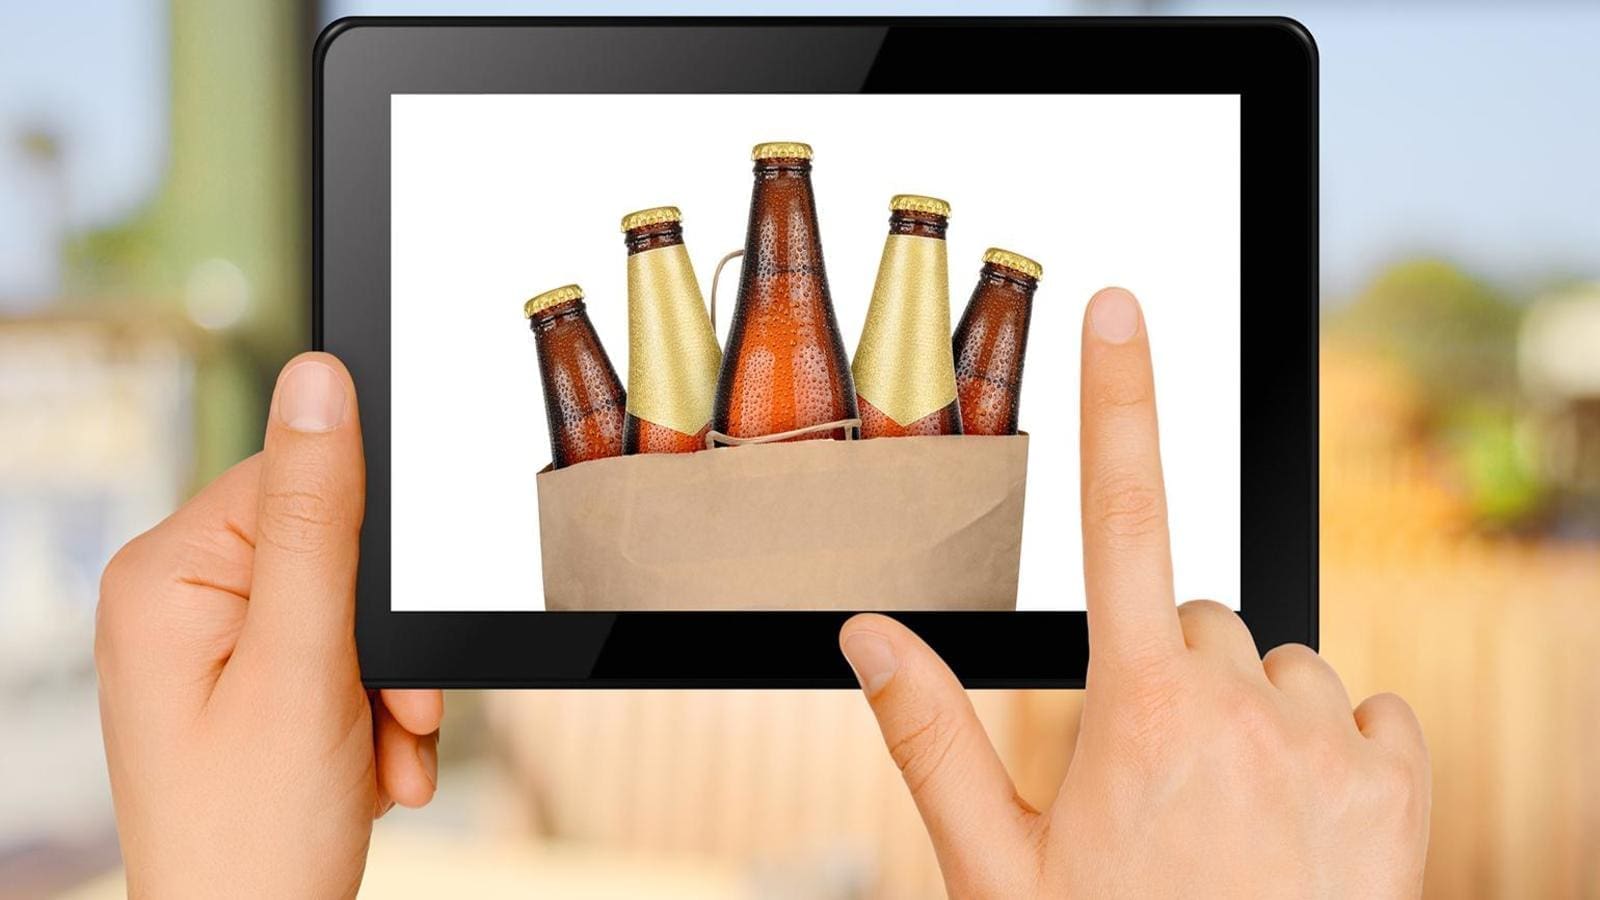 New global standard for online sale of alcohol introduced to support responsible drinking